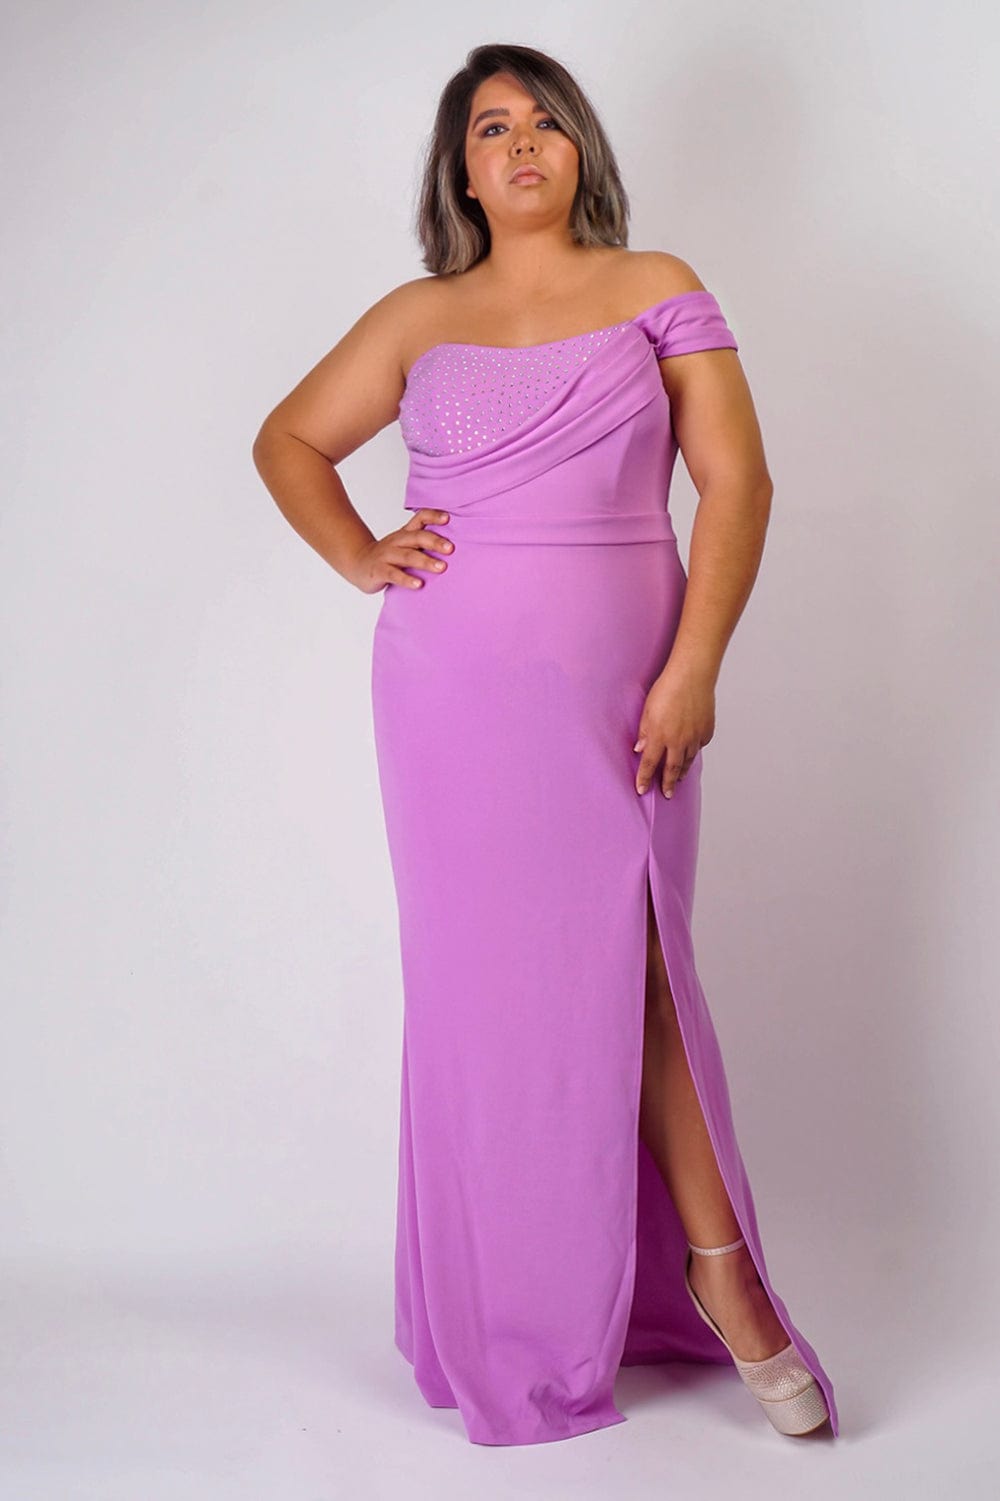 DCD GOWNS Plus Lavender One Shoulder Drape with Rhinestone Gown